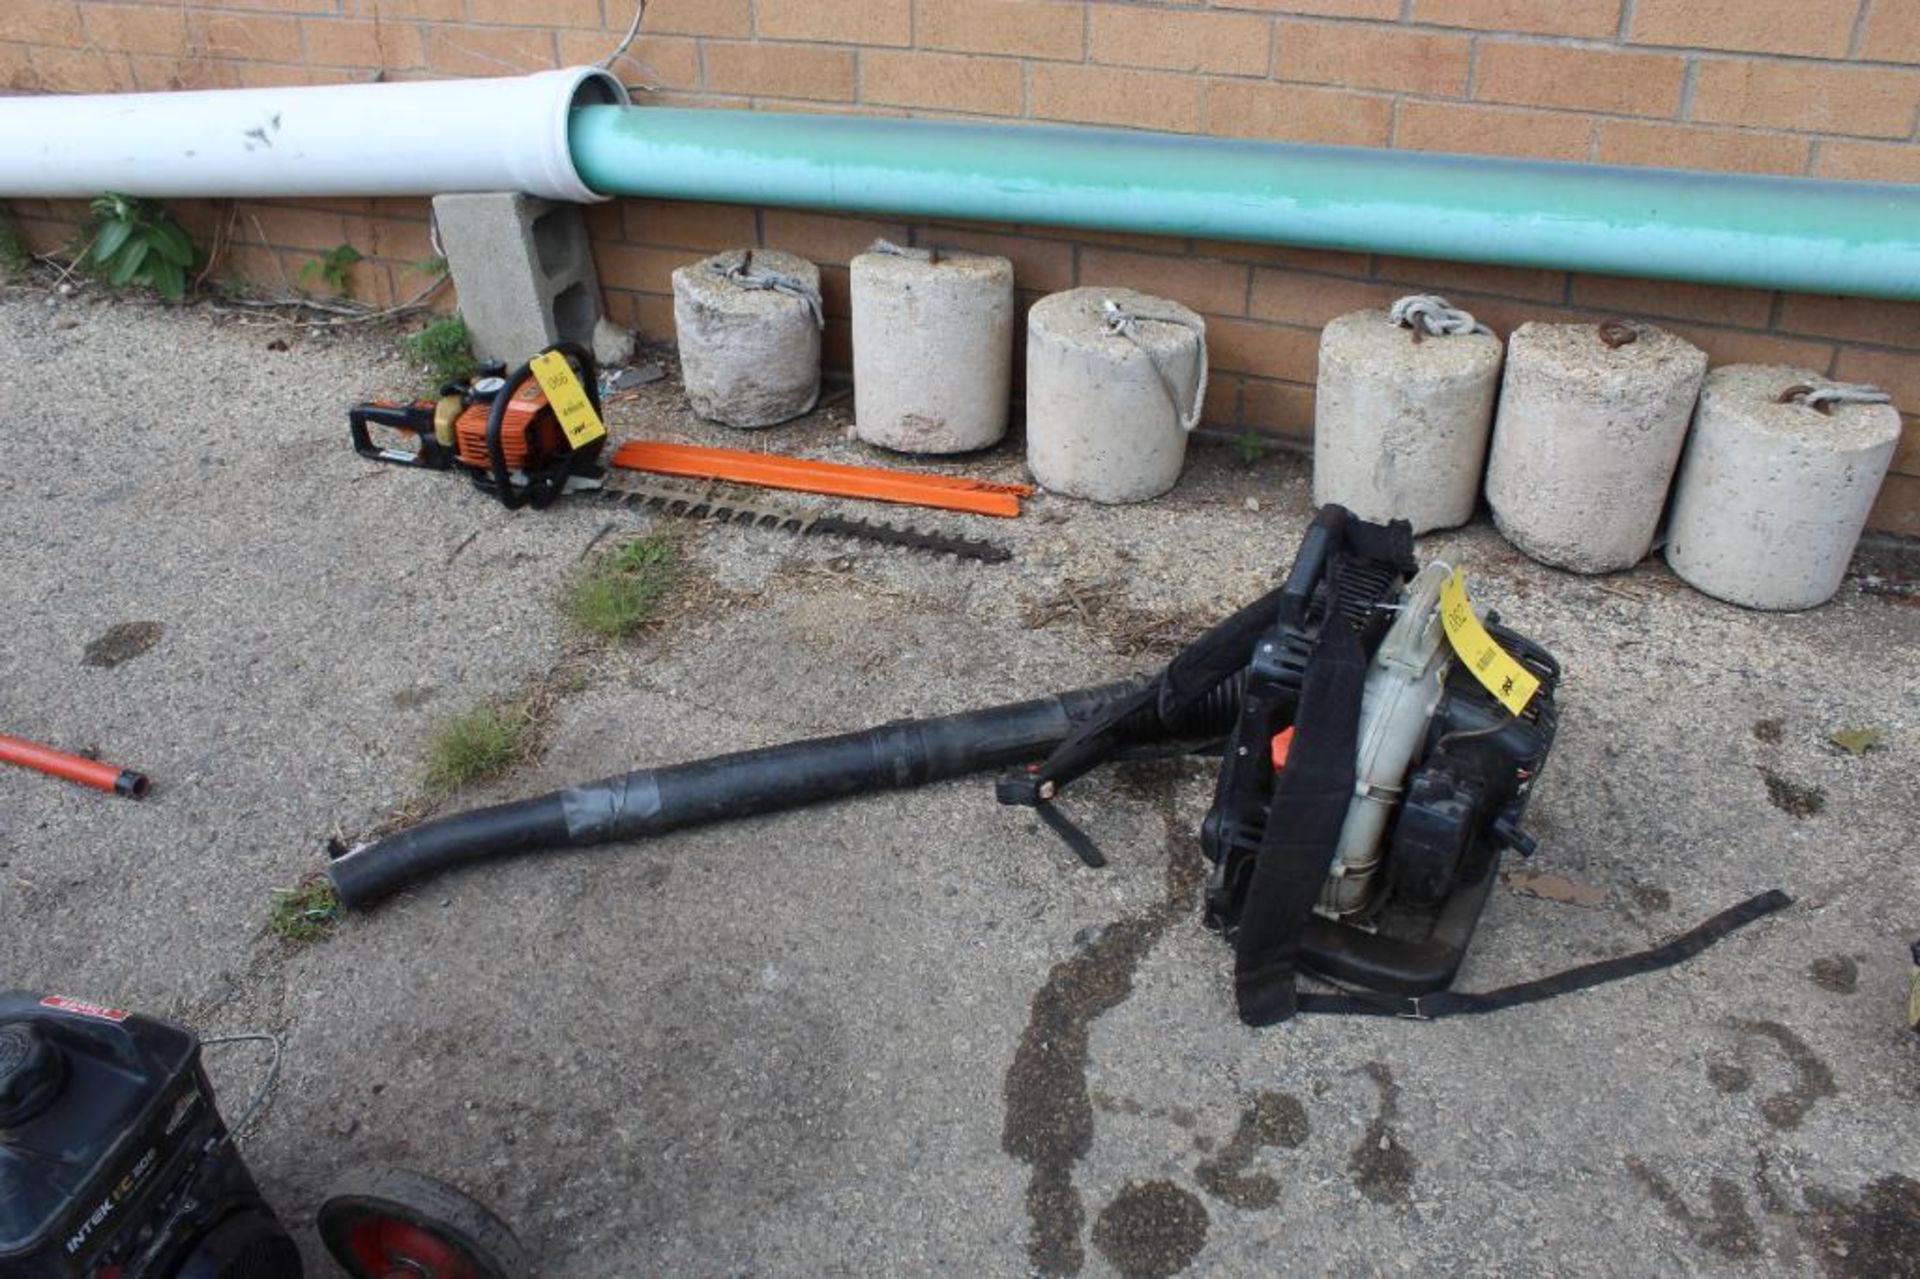 Echo PB-620 Gas Powered Backpack Leaf Blower - Image 2 of 2